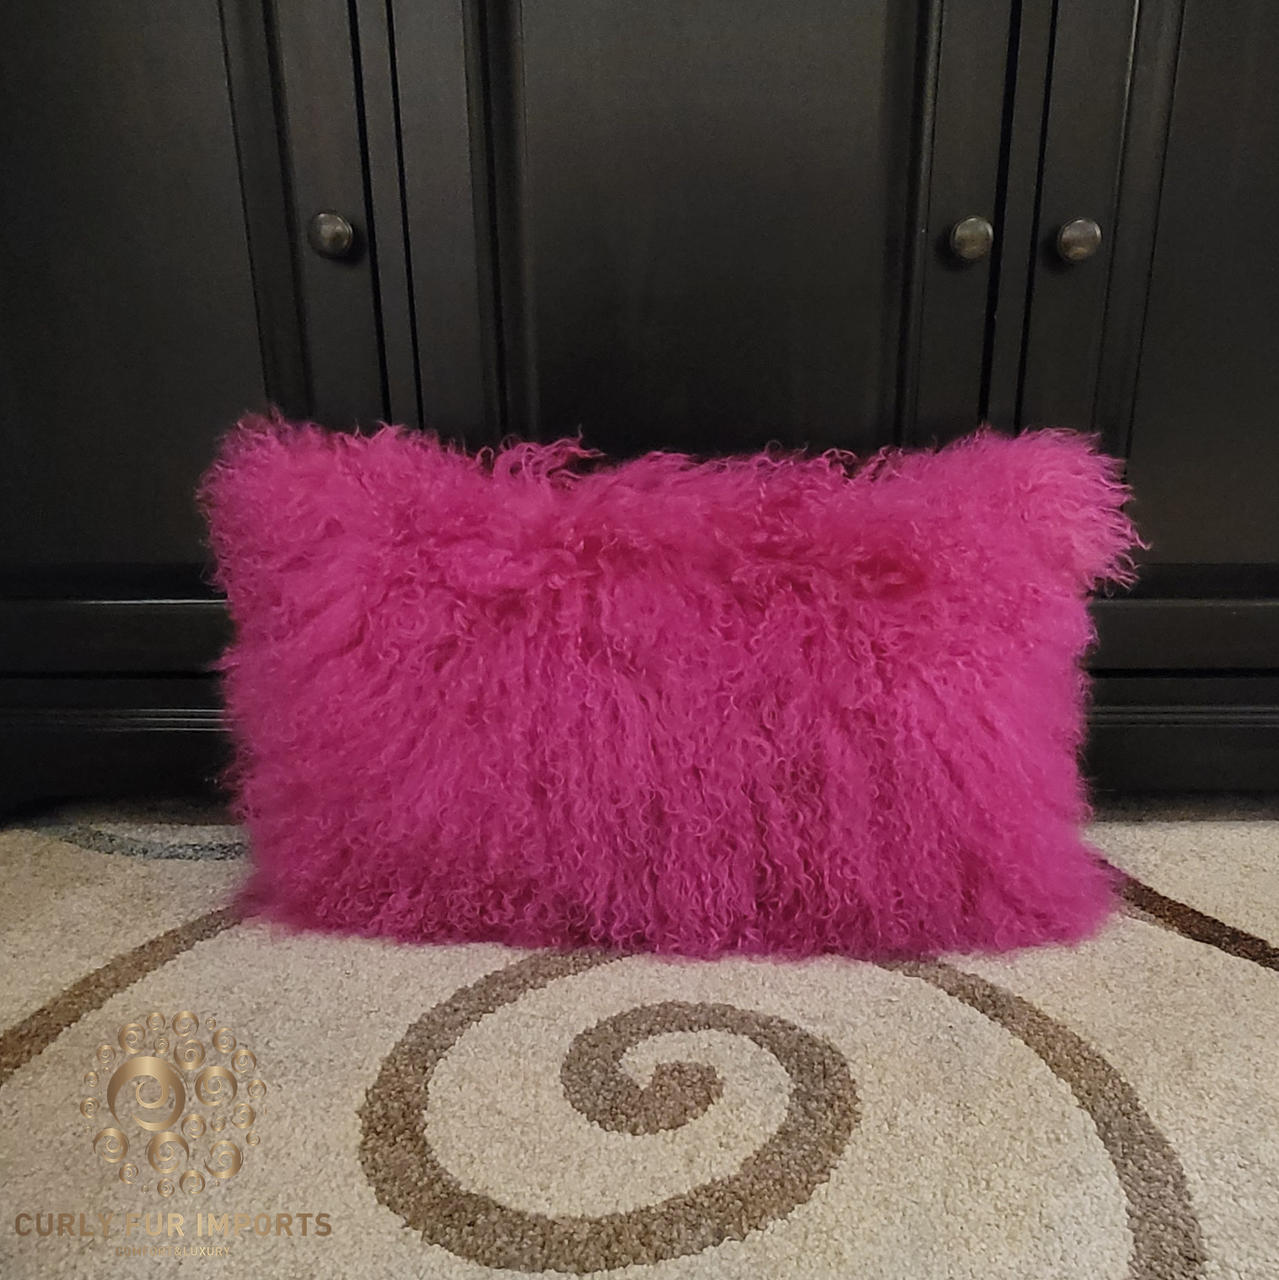 https://cdn11.bigcommerce.com/s-1f7e8/images/stencil/1280x1280/products/1421/6886/chocking_pink_lamb_fur_pillow__79146.1701395123.png?c=3